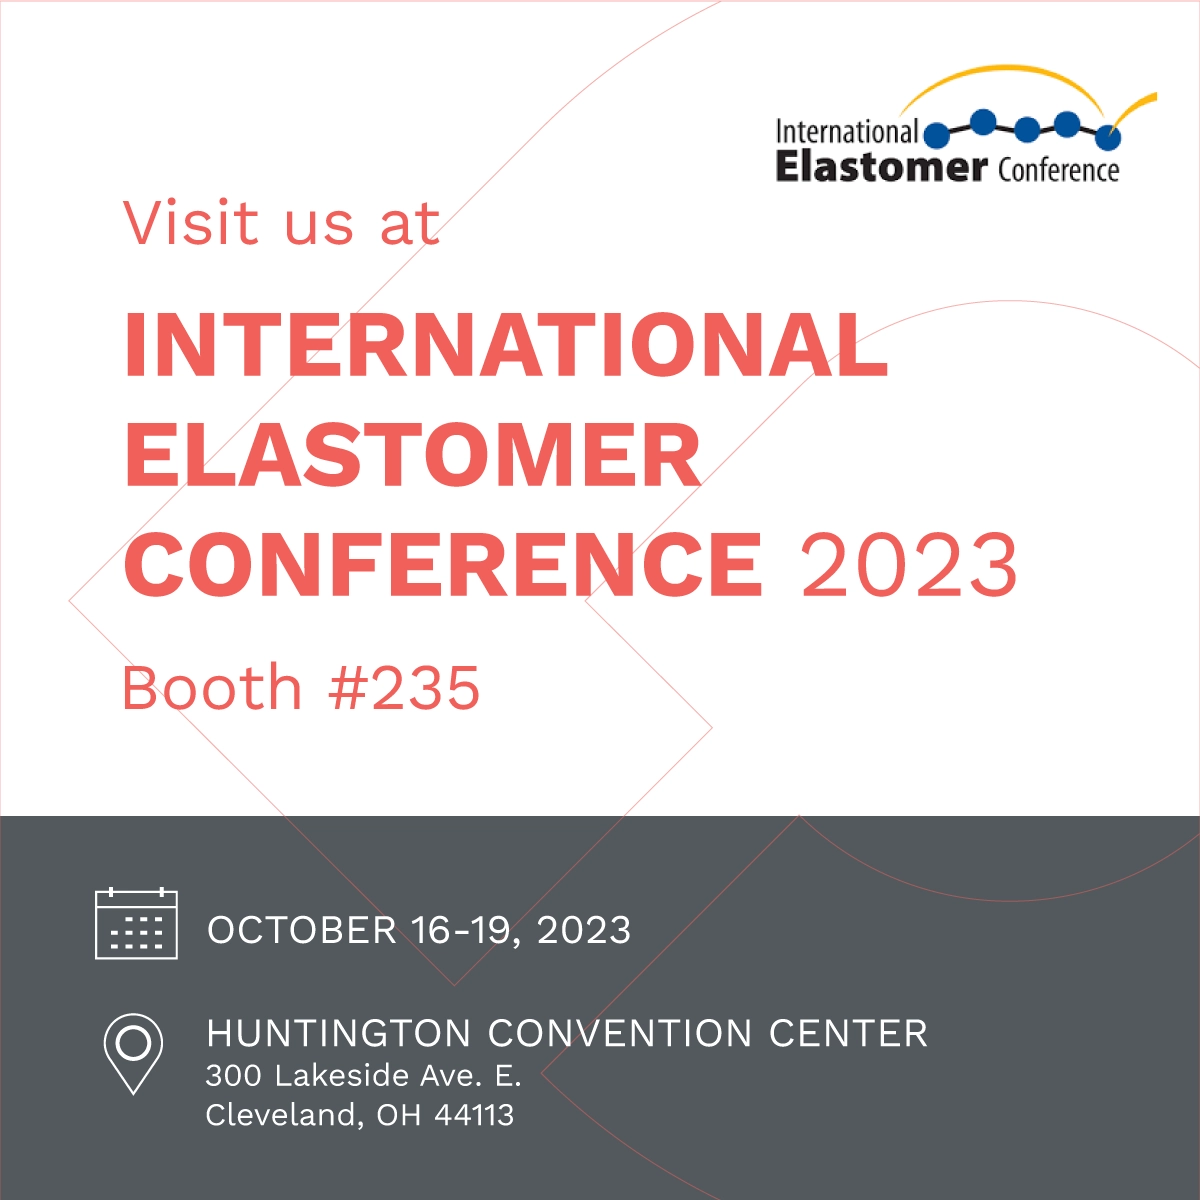 Come and visit us at the International Elastomer Conference in